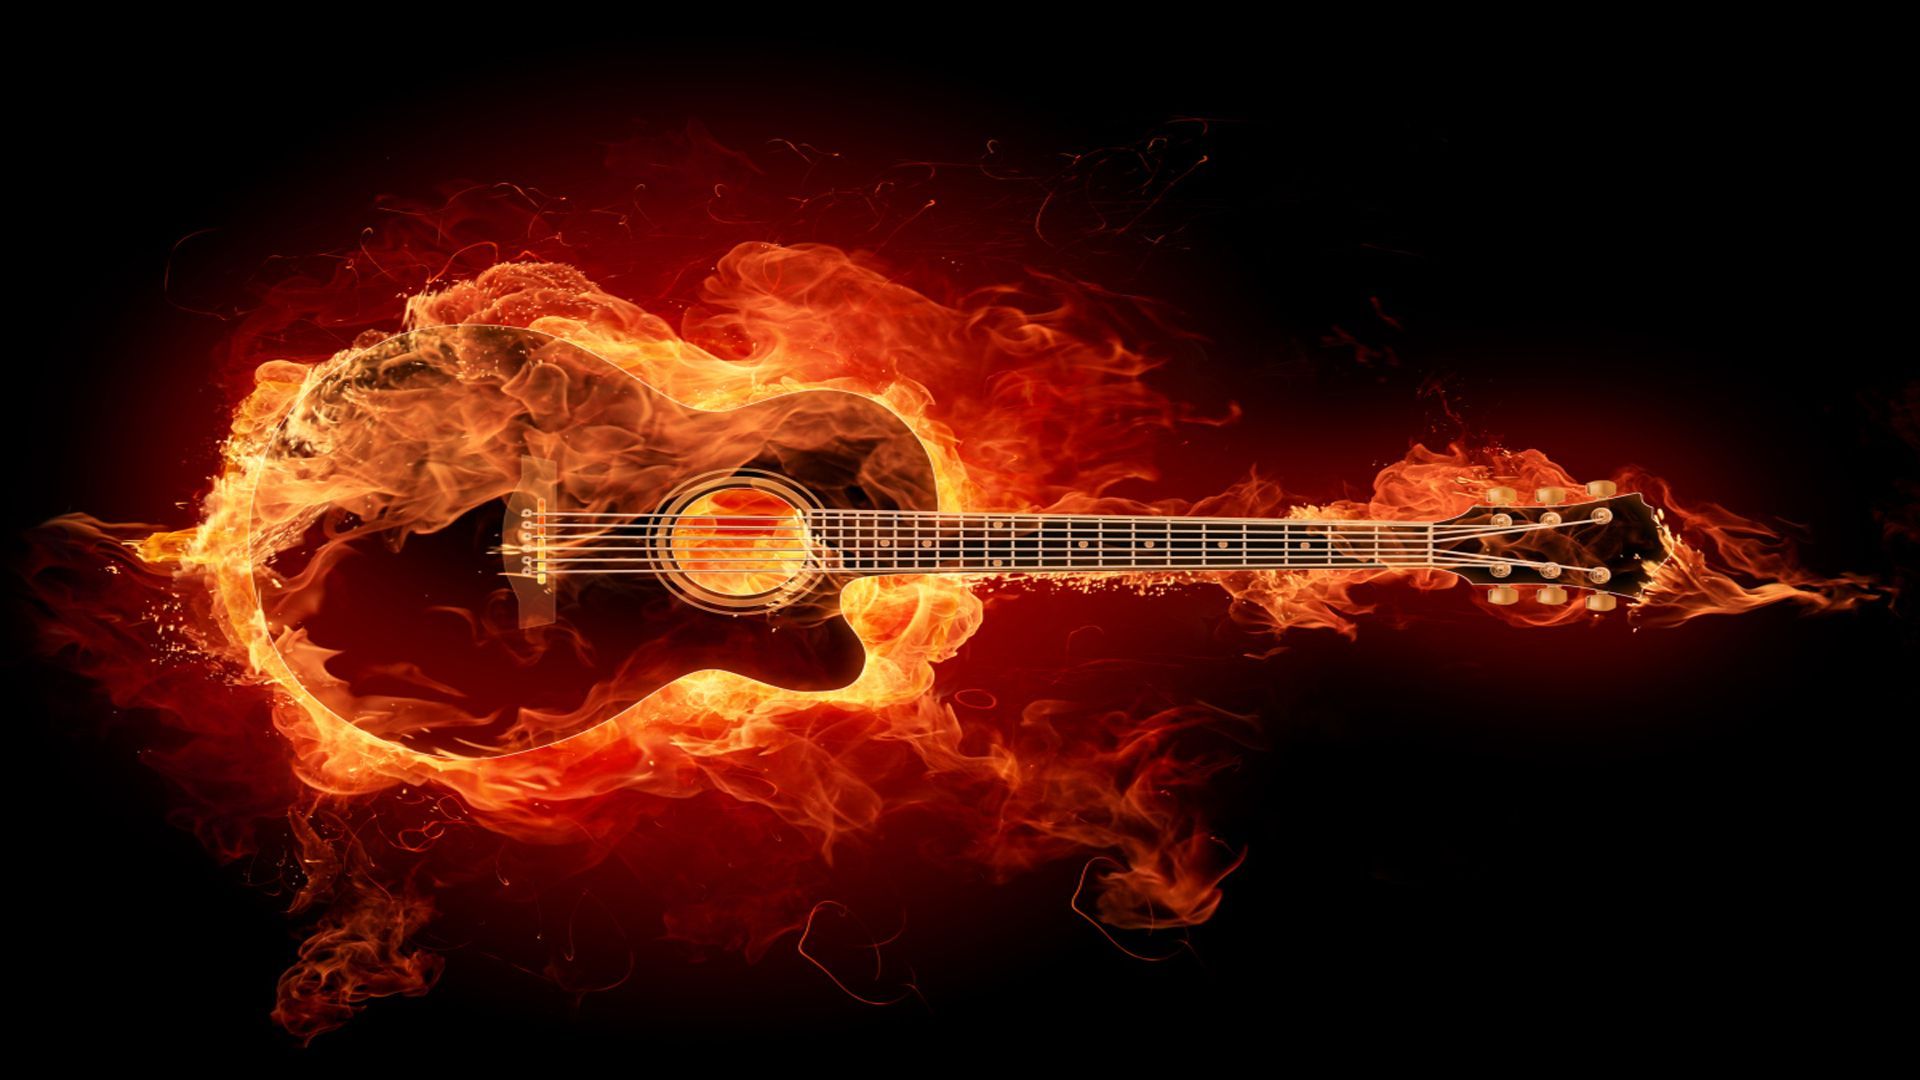 Gallery for - guitar in flames wallpaper